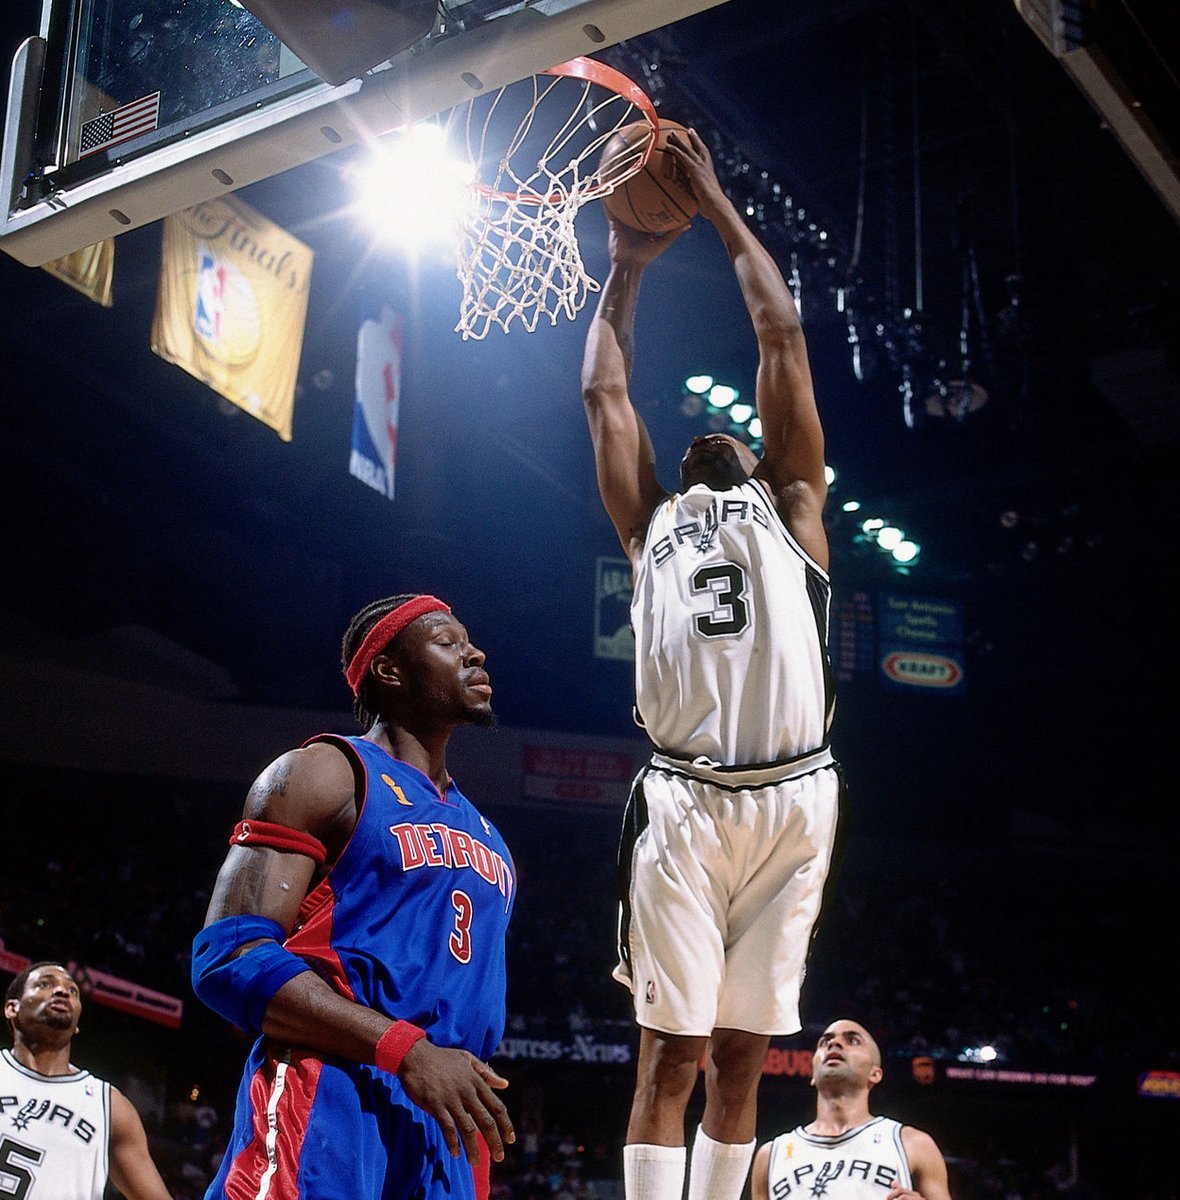 Glenn "Big Dog" Robinson was added to the Spurs roster on April 4, 2005 and played nine games with San Antonio to finish the 2004-05 season, also appearing in 13 playoff games during their '05 NBA Championship run.